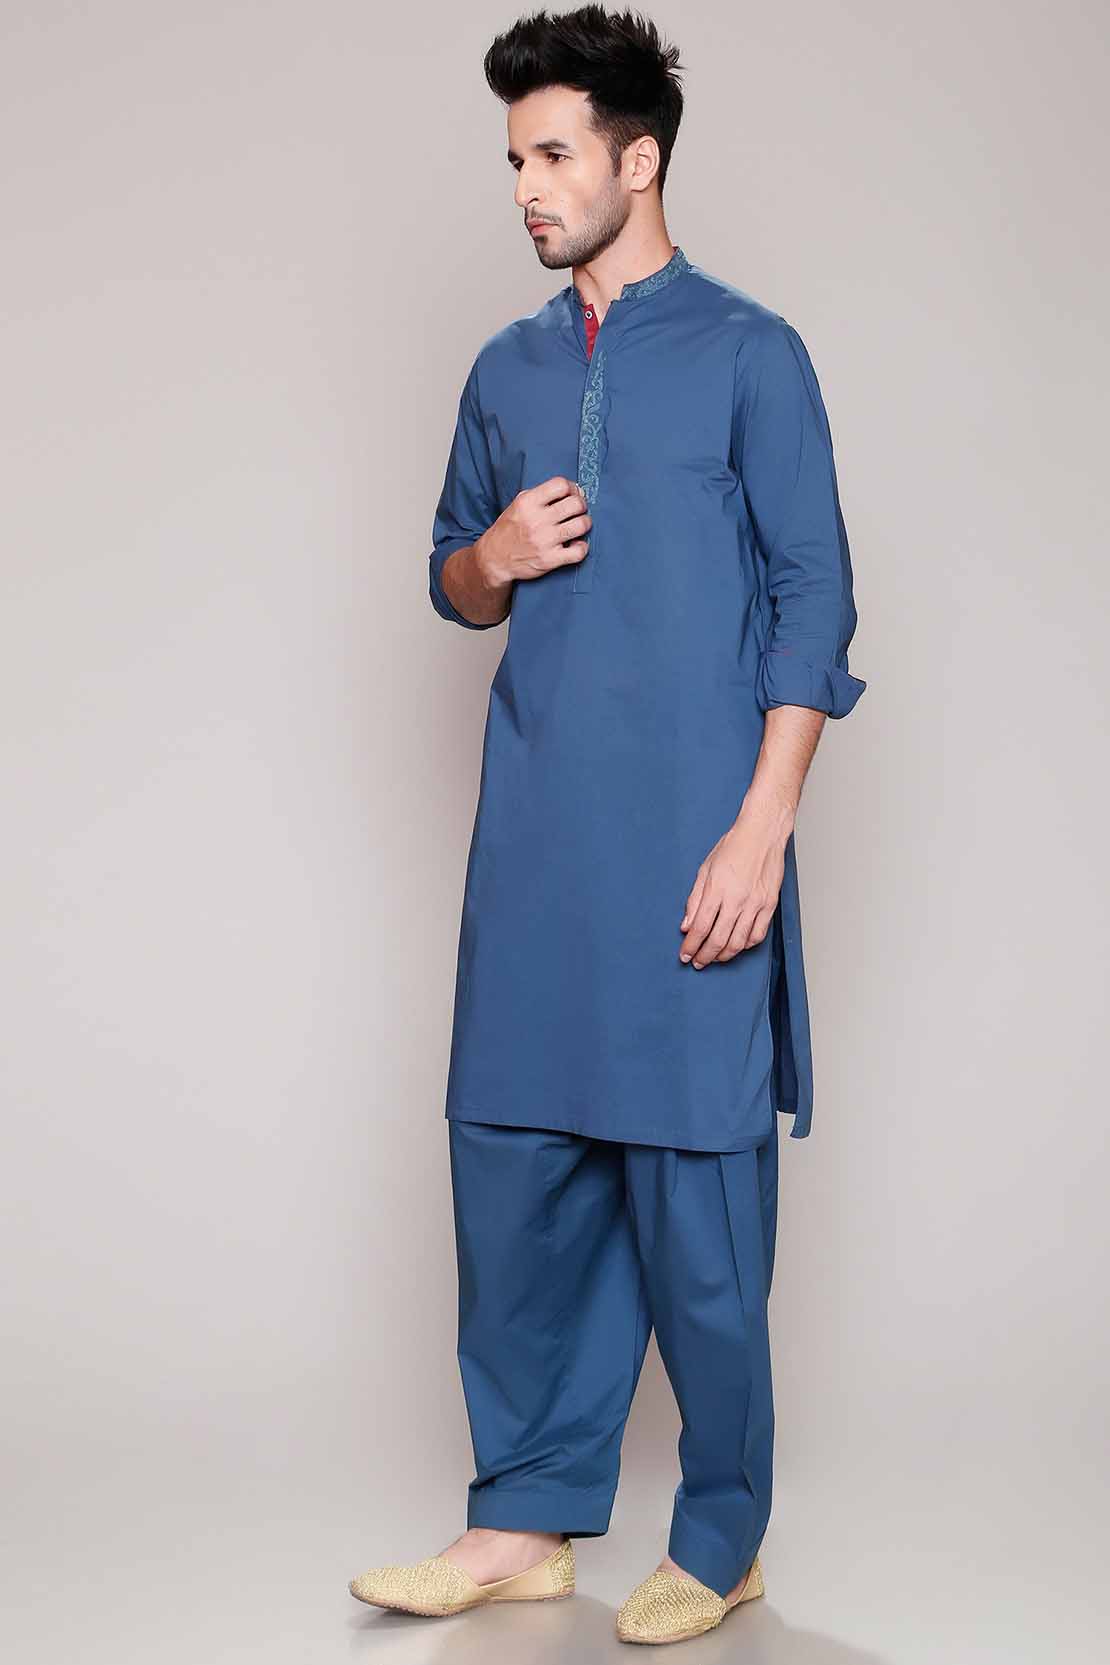 Latest Men Modern Kurta Styles Designs Collection 2020 by Chinyere